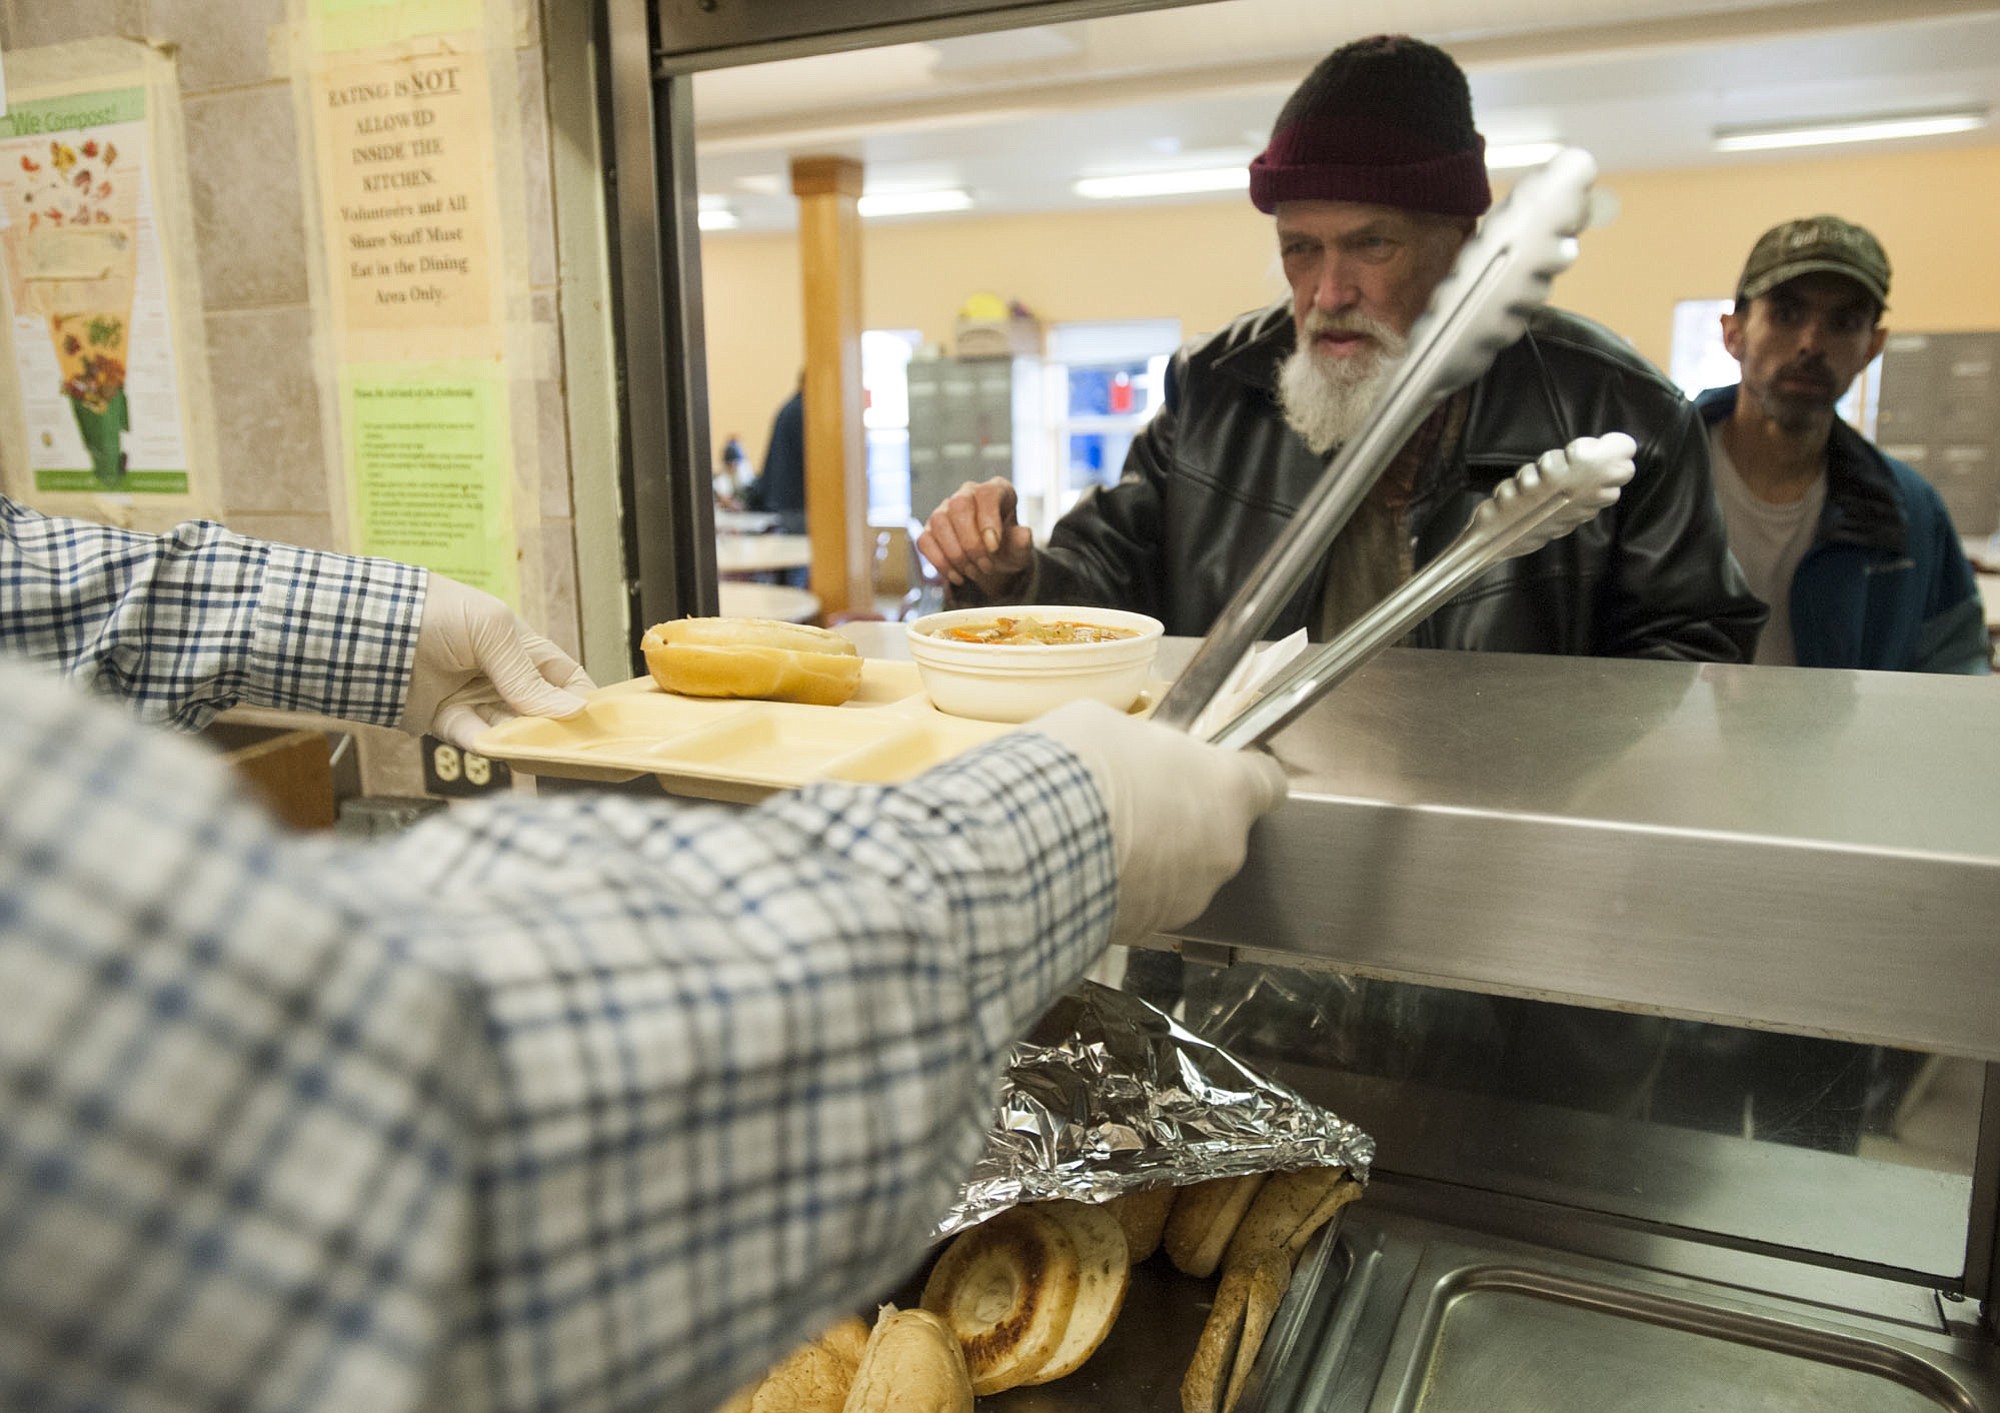 Volunteers serve lunch to the homeless at Share House in Vancouver on Thursday.